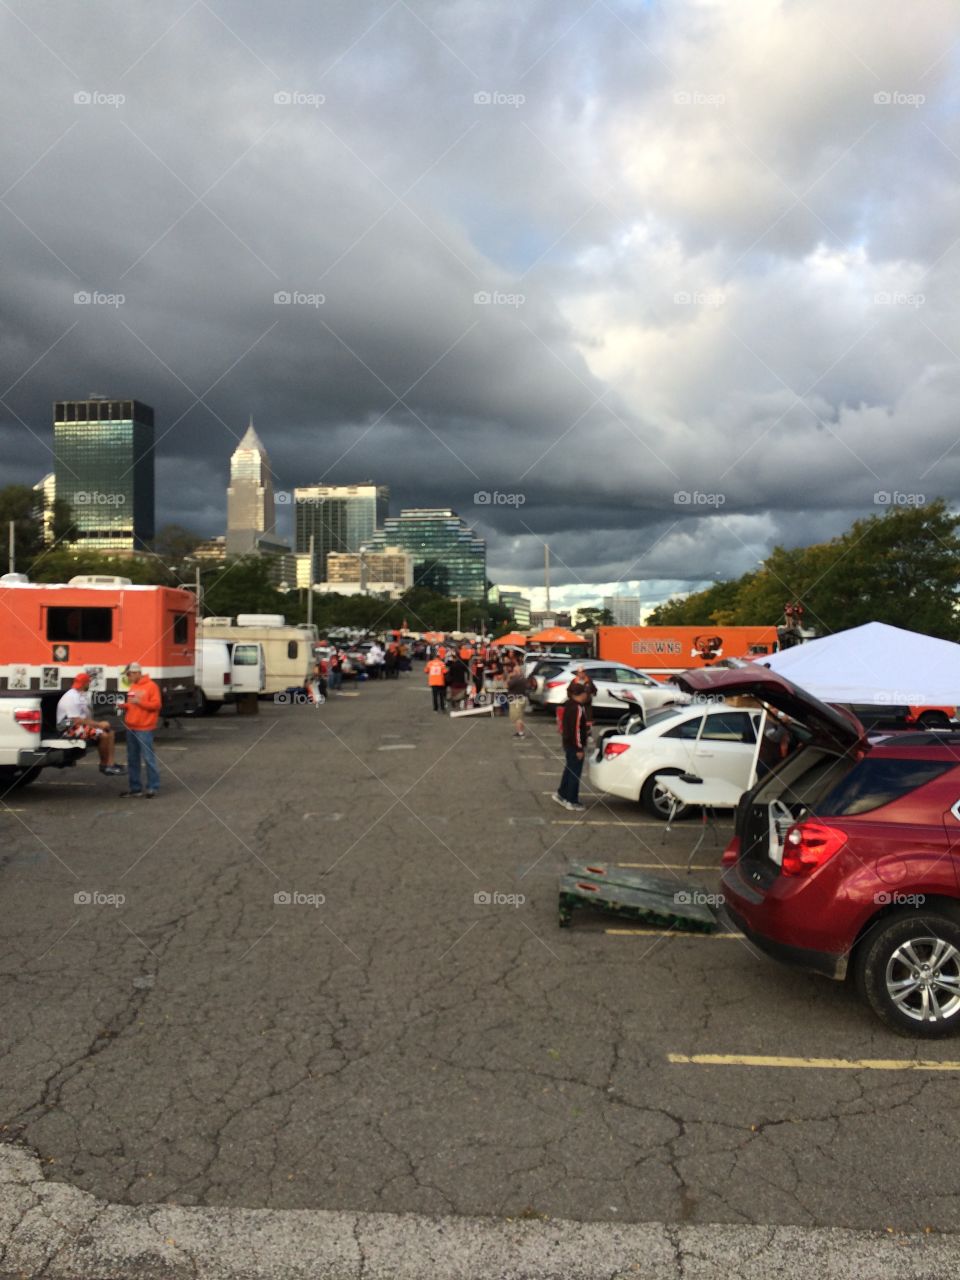 Cleveland Browns Tailgating